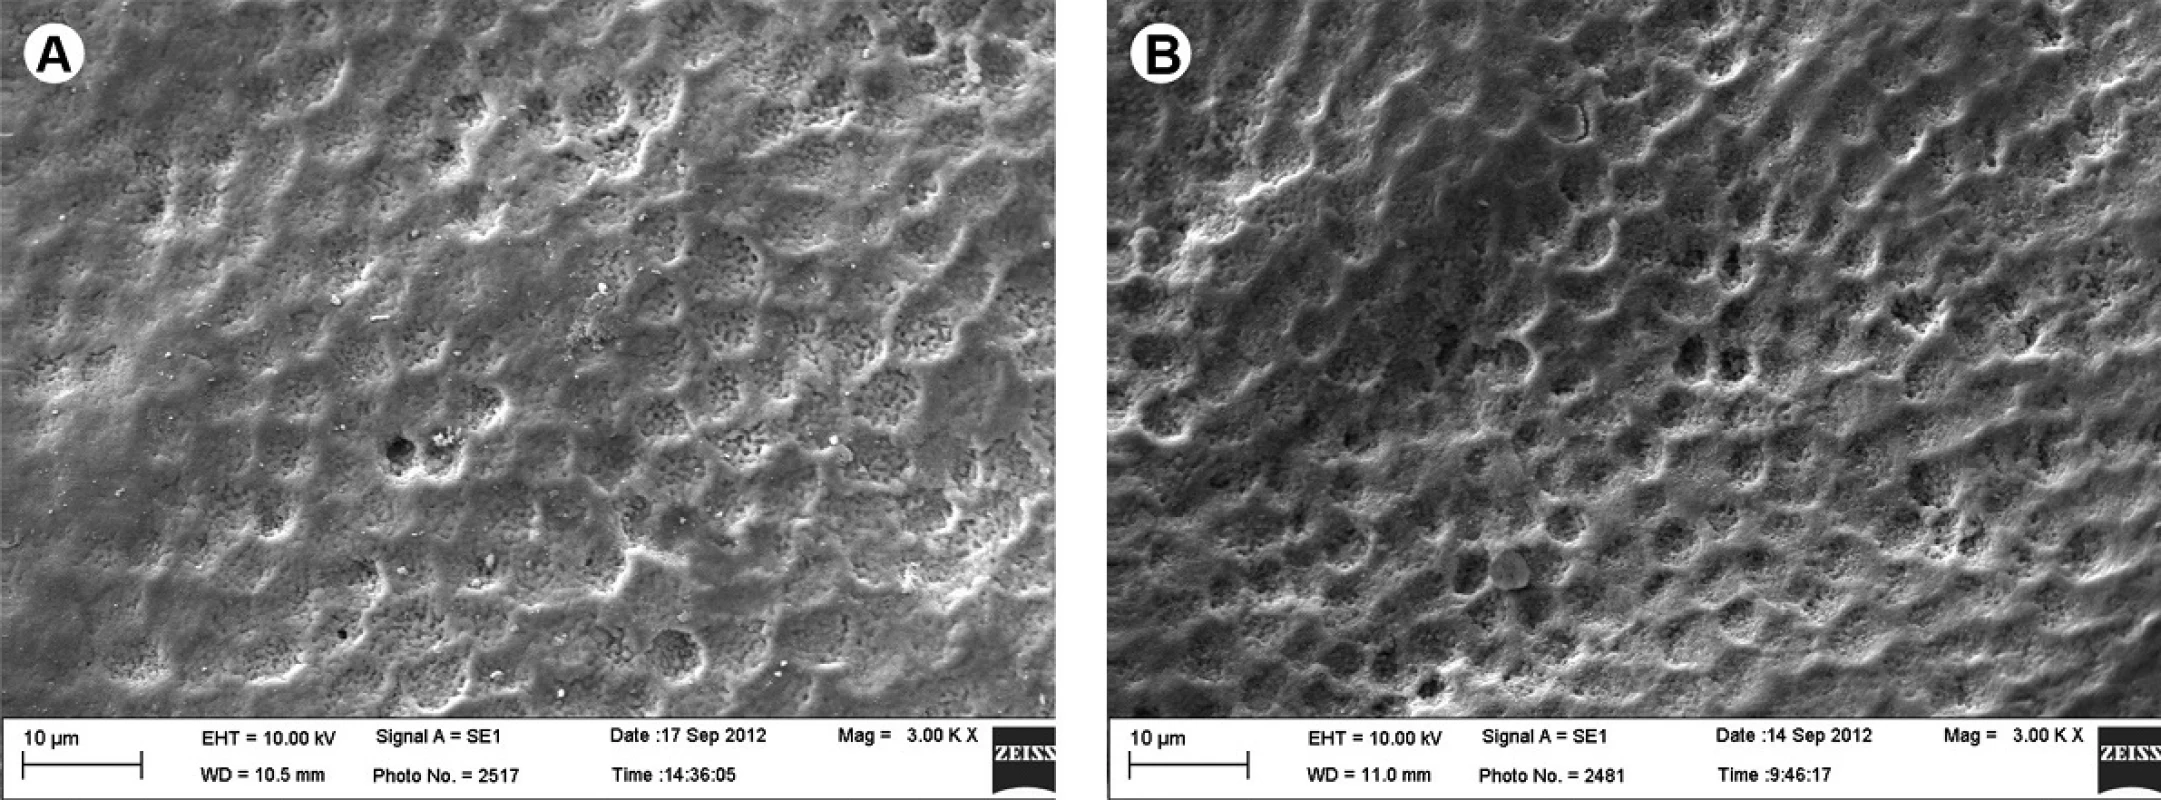 SEM analysis. A: Specimen subjected to cariogenic challenge. The enamel porous surface aspect presents partial dissolution of the aprismatic layer (arrow) (3,000×). B: Specimen subjected to cariogenic challenge and bleaching procedure. The substantial dissolution of the aprismatic layer and increased porosity can be observed, allowing visualization of the enamel prism mouths, forming new channels for dissemination (3,000×).